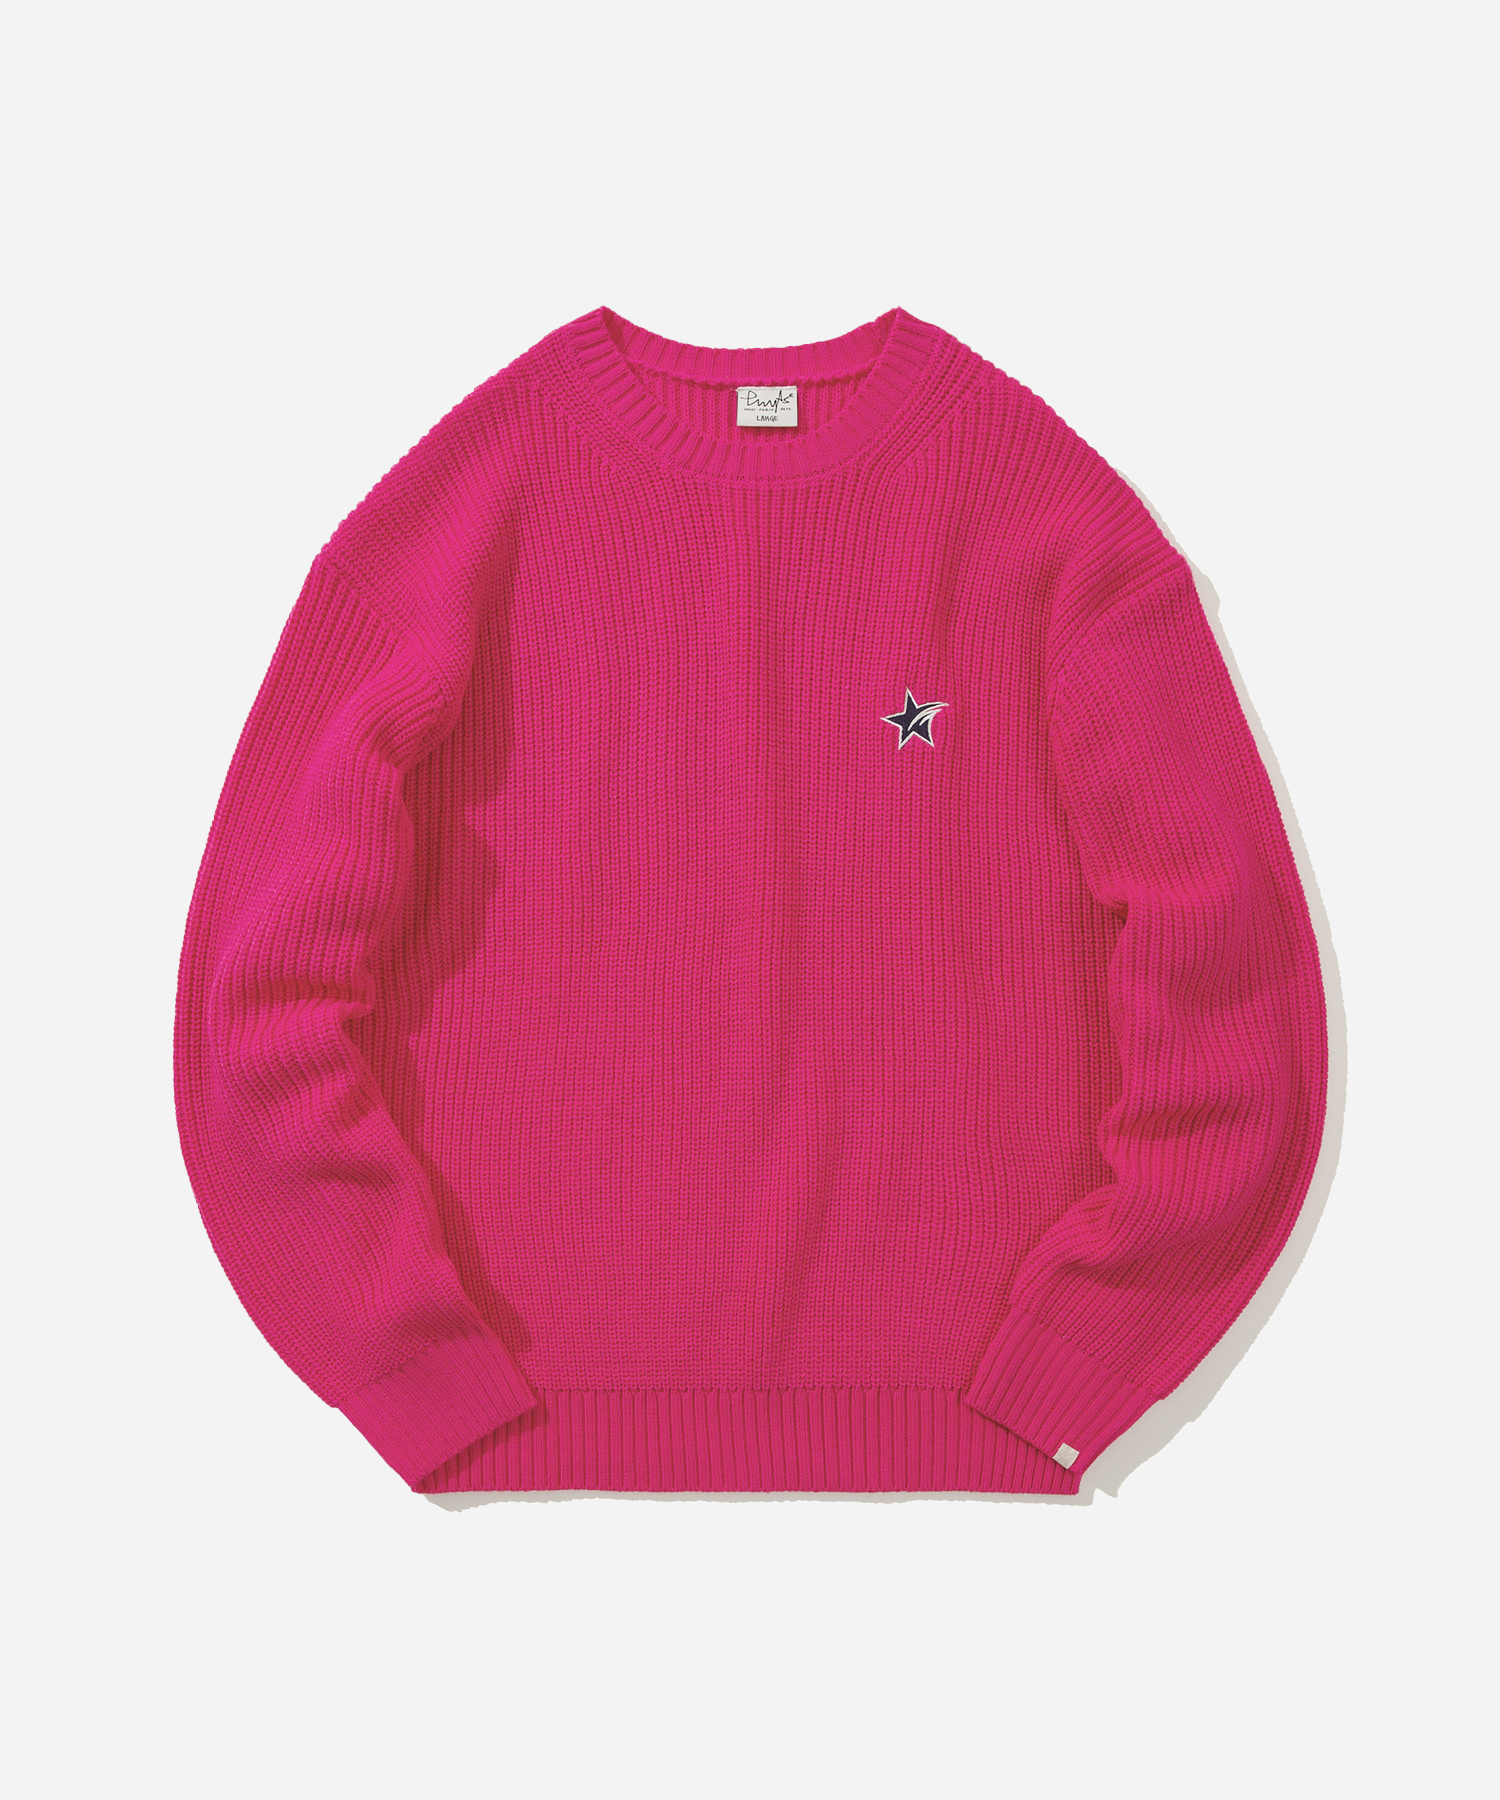 PHYPS® SMALL STARDUST KNIT HOT PINK